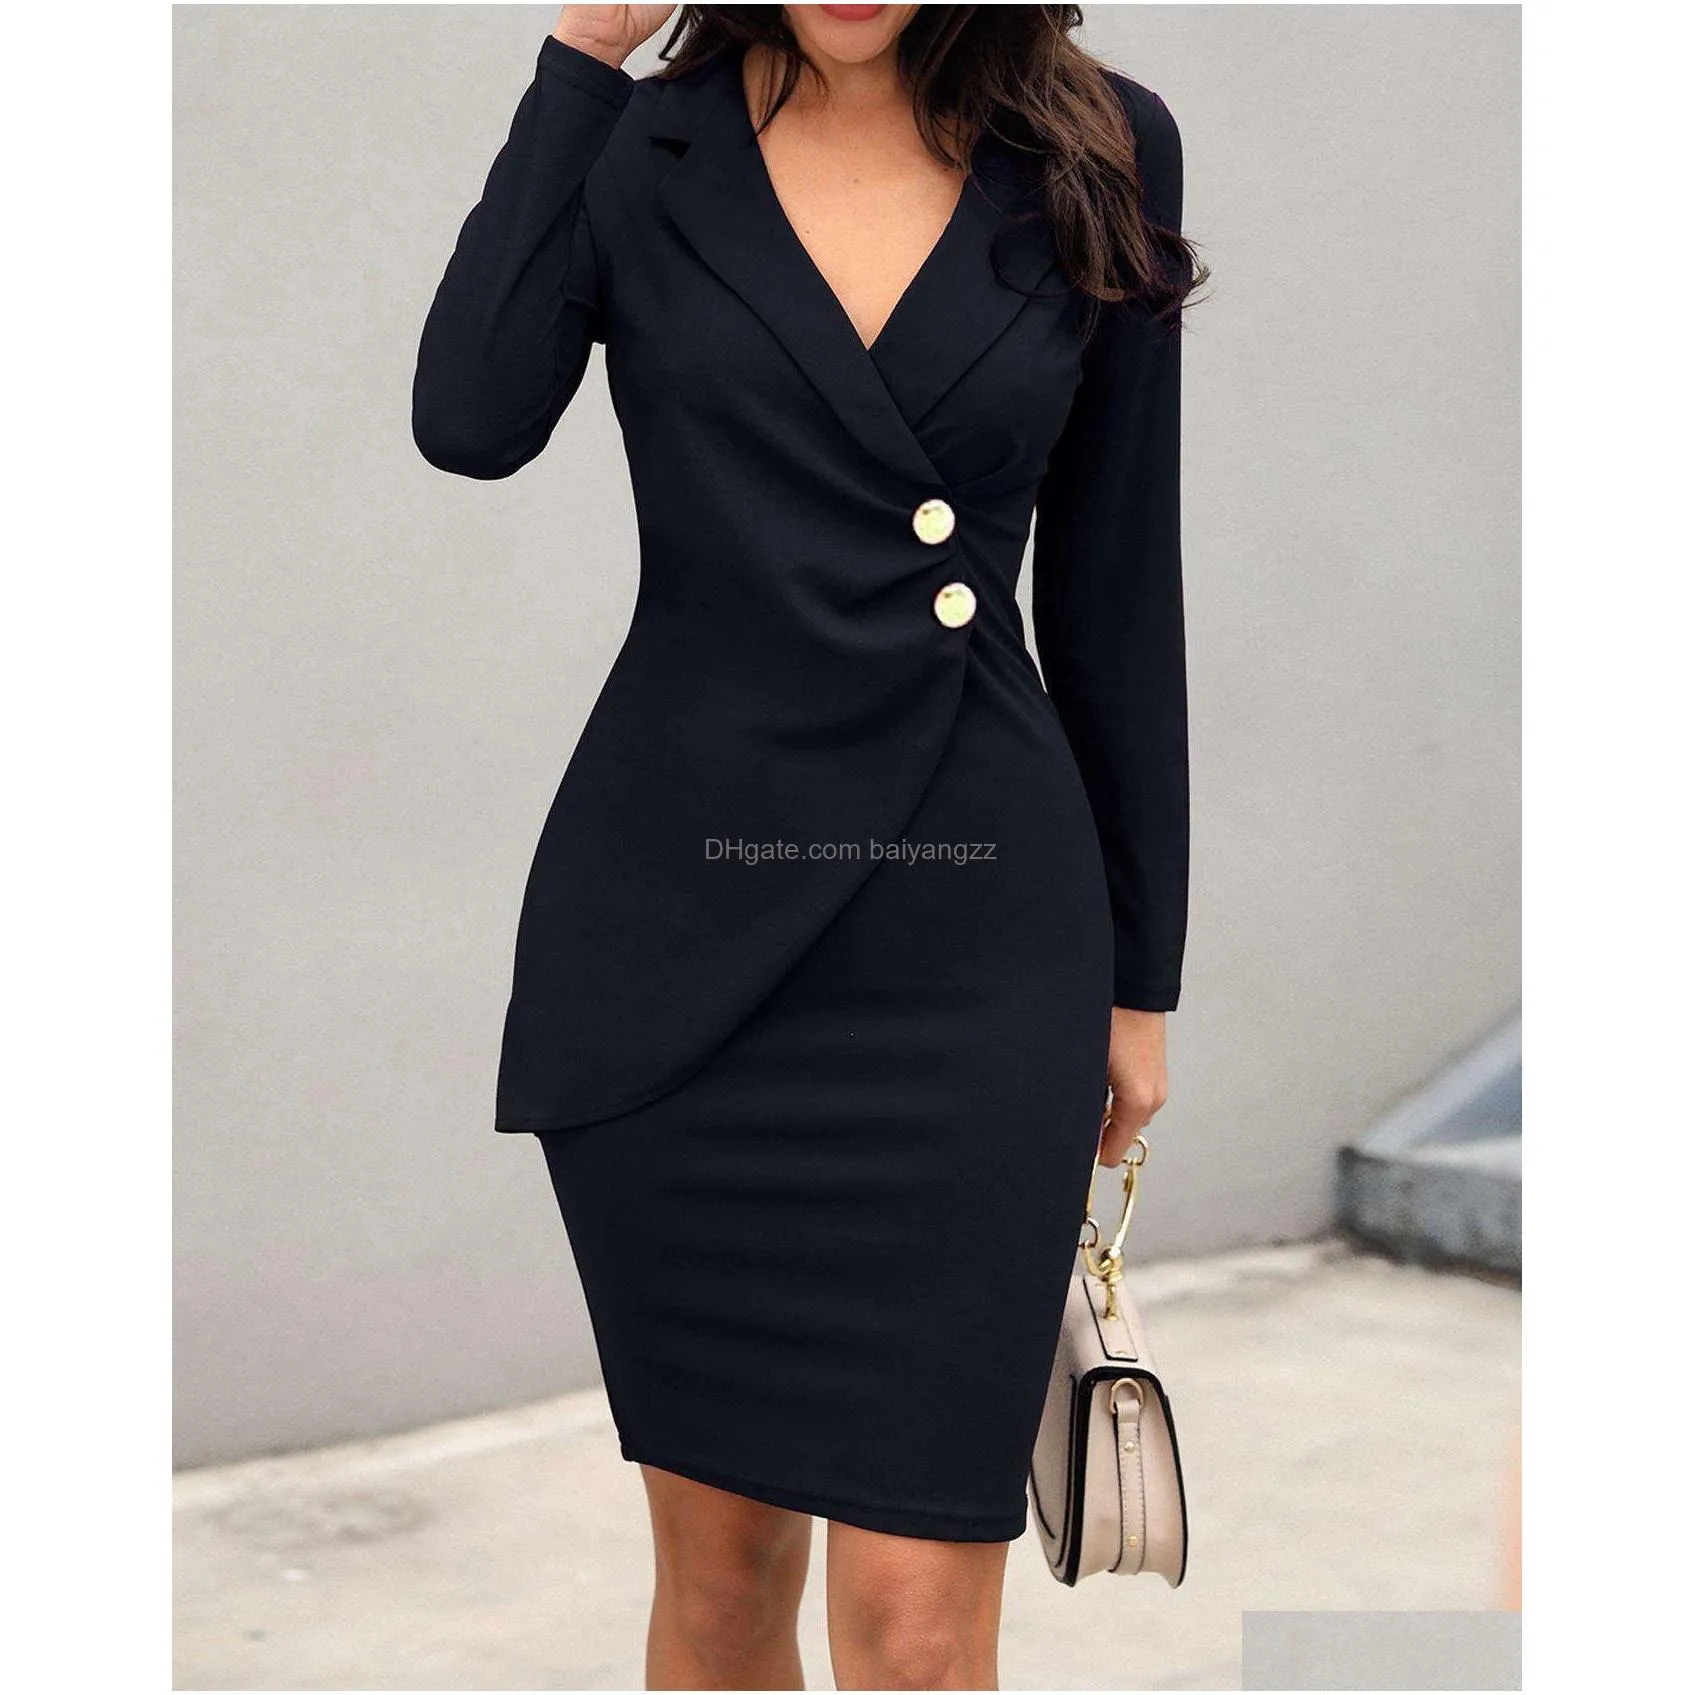 Basic & Casual Dresses Autumn Slim Fitting Buttocks Button Up Professional Dresses Womens Clothes Drop Delivery Apparel Women`S Clothi Dhoik